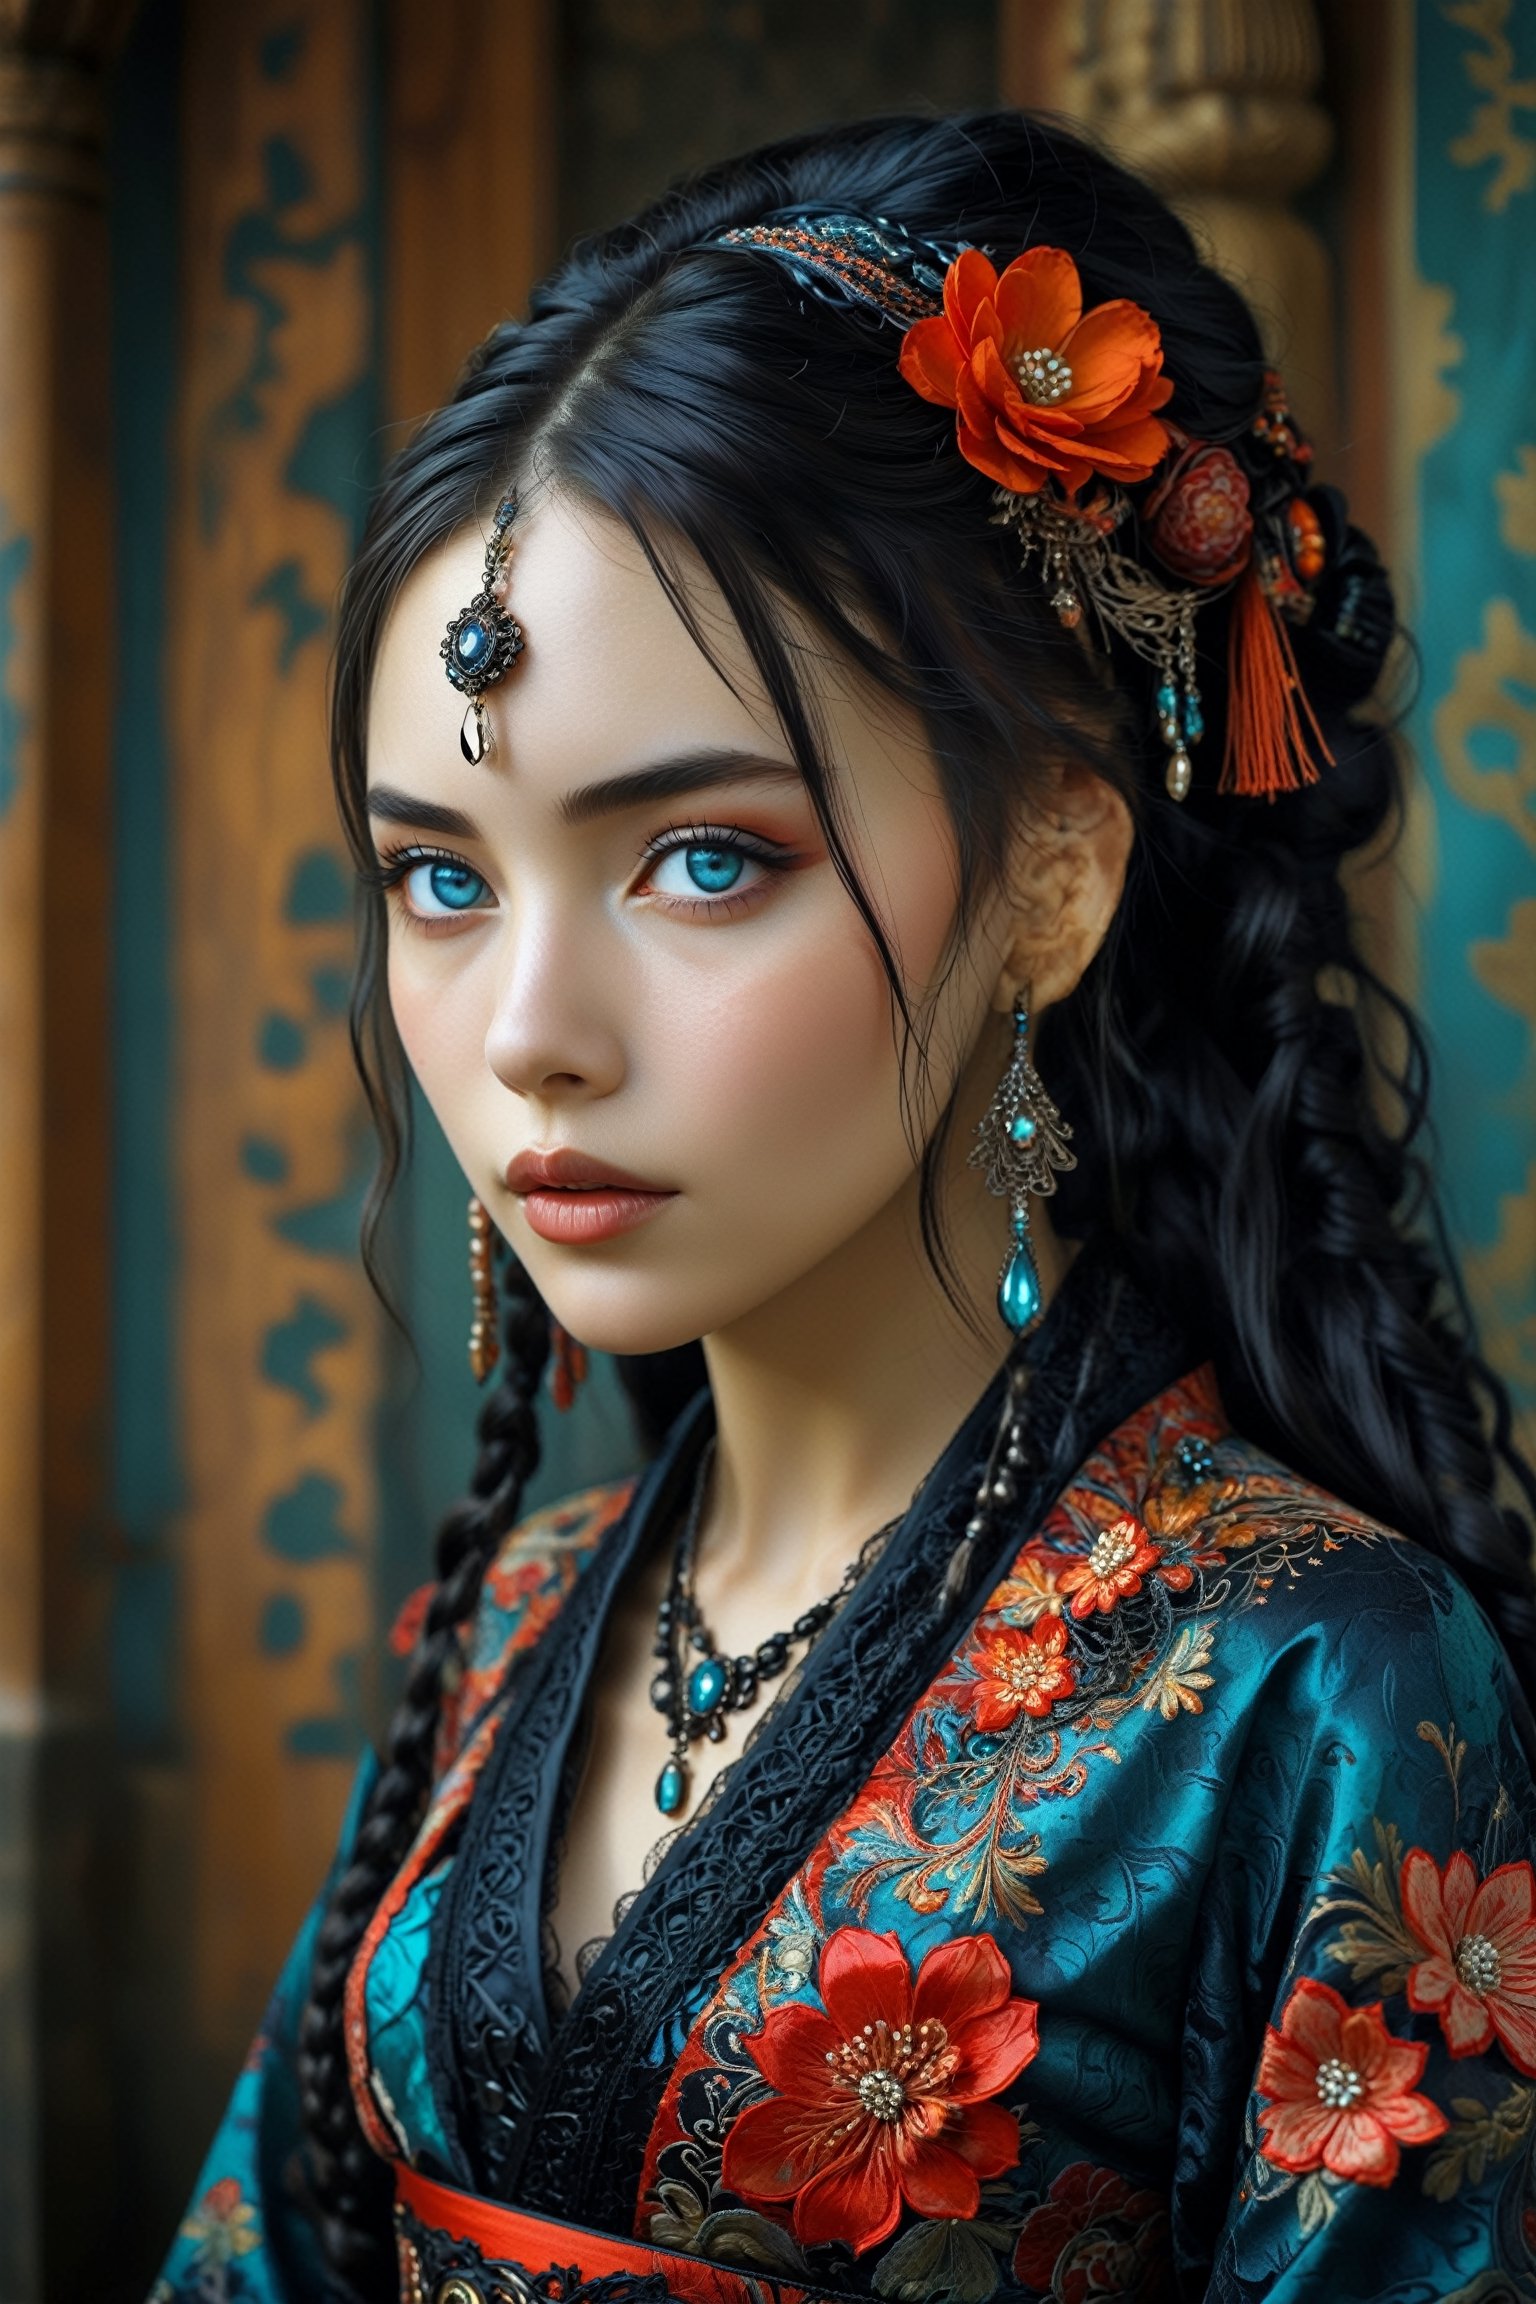  (beautiful French woman), beautiful Eyes,in a Central Asian wedding outfit, reimagined in Japanese Gothic style,Her colorful dress features intricate embroidery with Gothic lace and black accents, Kimono-style sleeves and an obi belt add a Japanese touch. She accessorizes with dark gemstone jewelry and a lace veil, her hair styled with braids and colorful ribbons, This fusion of Eastern European, Central Asian, and Japanese Gothic elements creates a unique and sophisticated look.,bustle dress,mad-marbled-paper,PIXAR